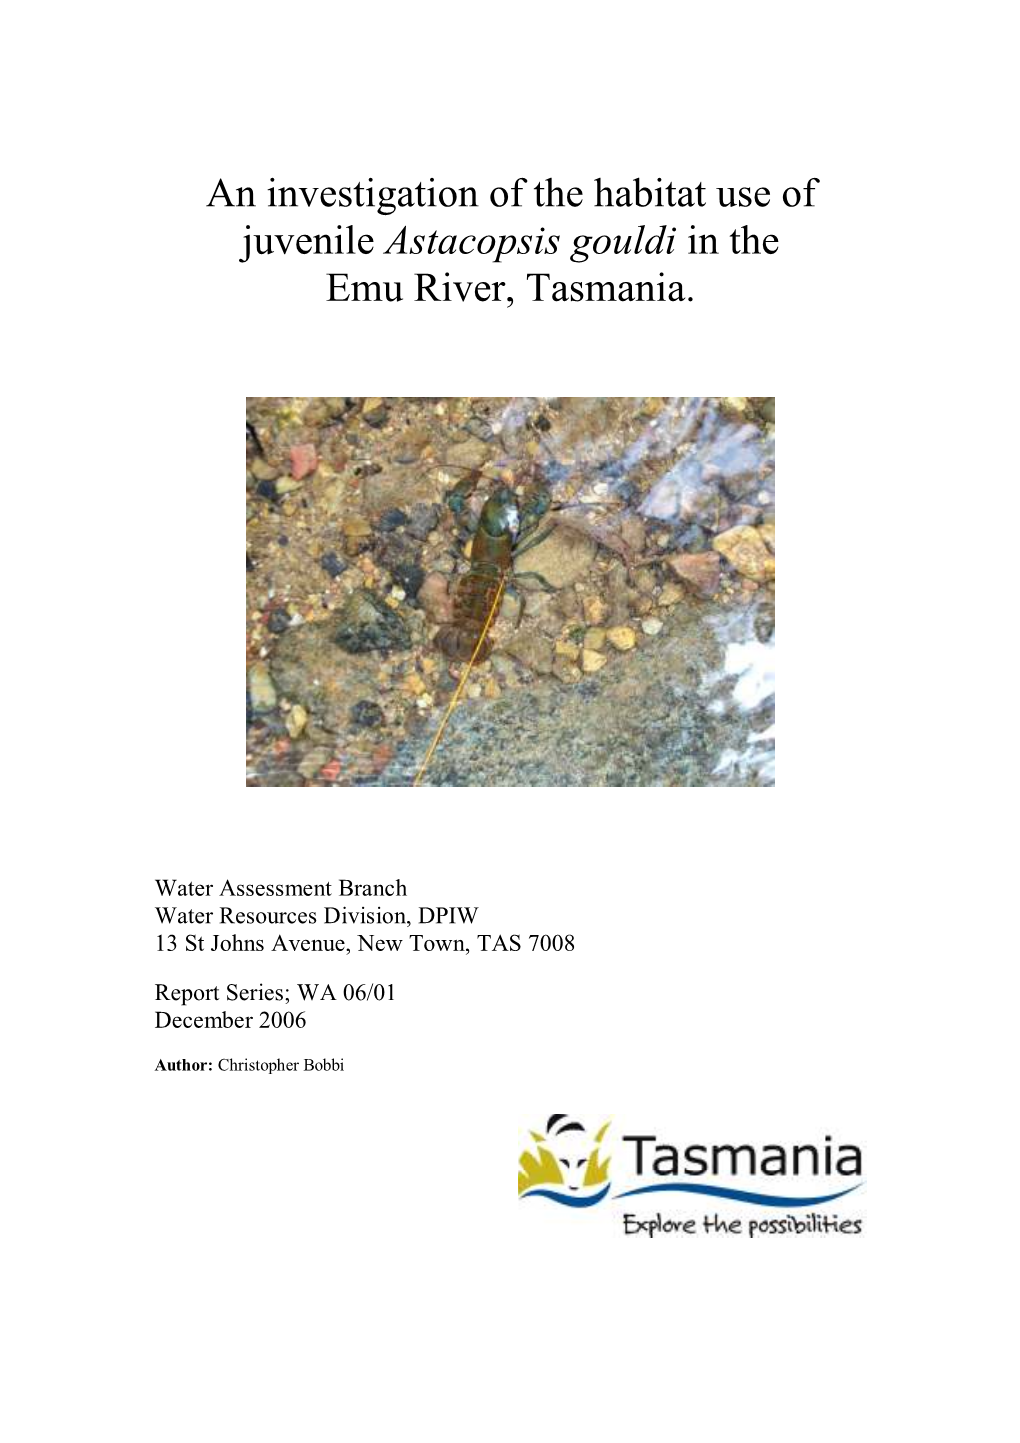 An Investigation of the Habitat Use of Juvenile Astacopsis Gouldi in the Emu River, Tasmania